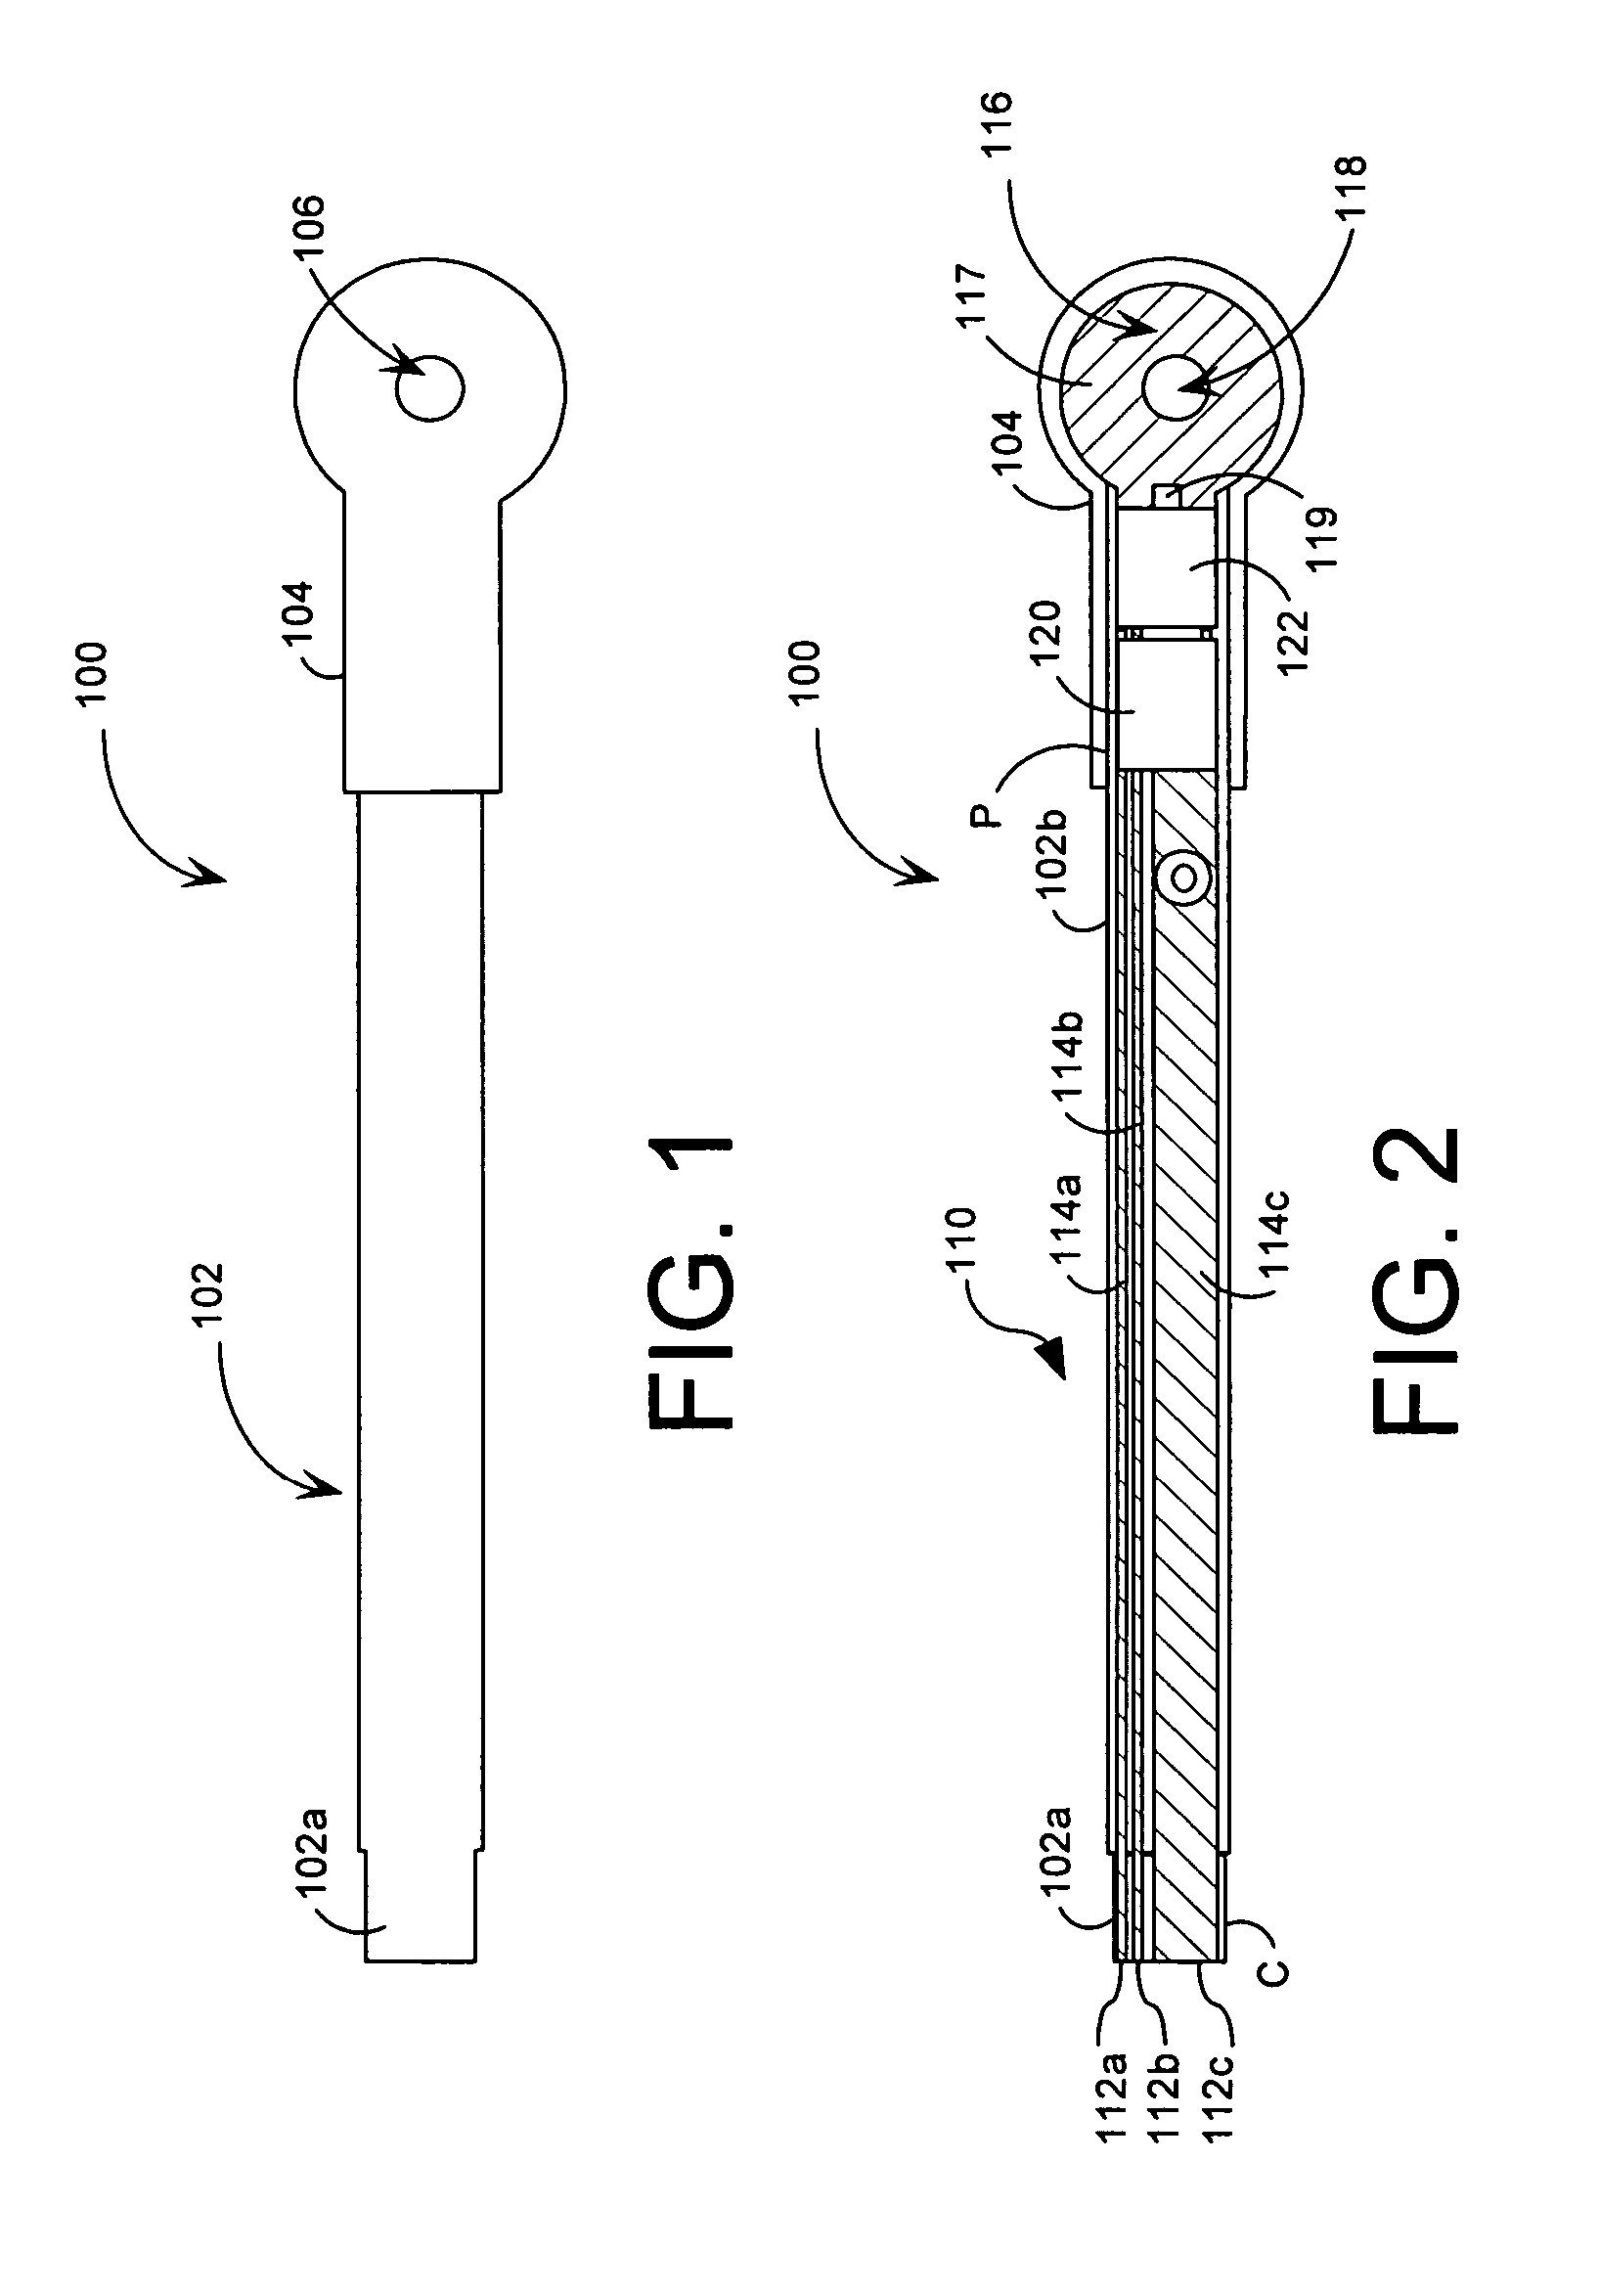 Flexible circuit temperature sensor assembly for flanged mounted electronic devices